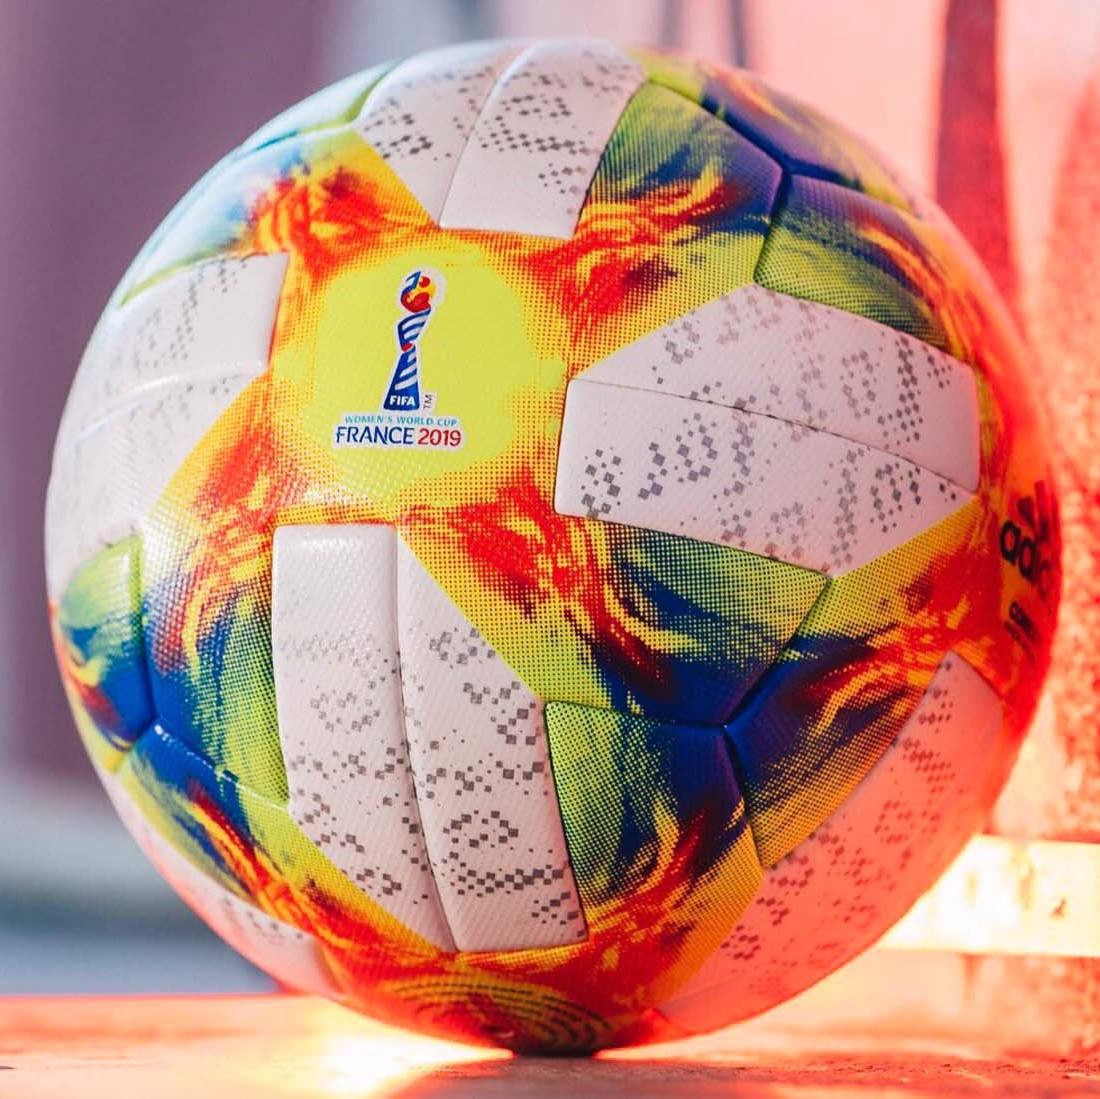 The US women's soccer team headed to the 2019 Women's Soccer World Cup: Ball and logo